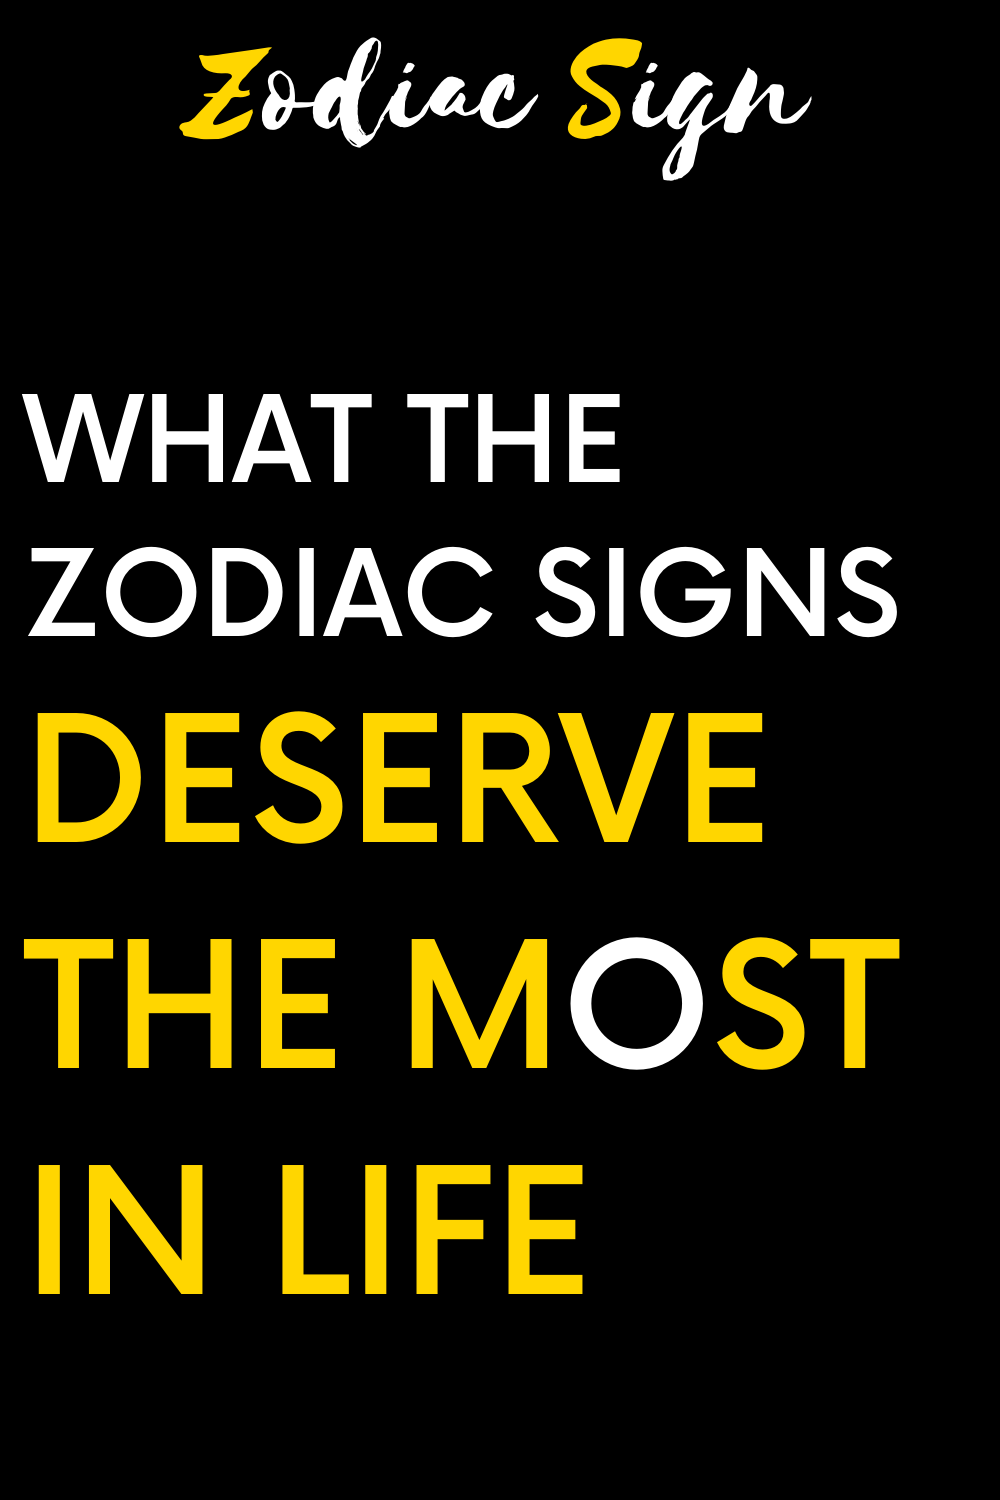 What the zodiac signs deserve the most in life